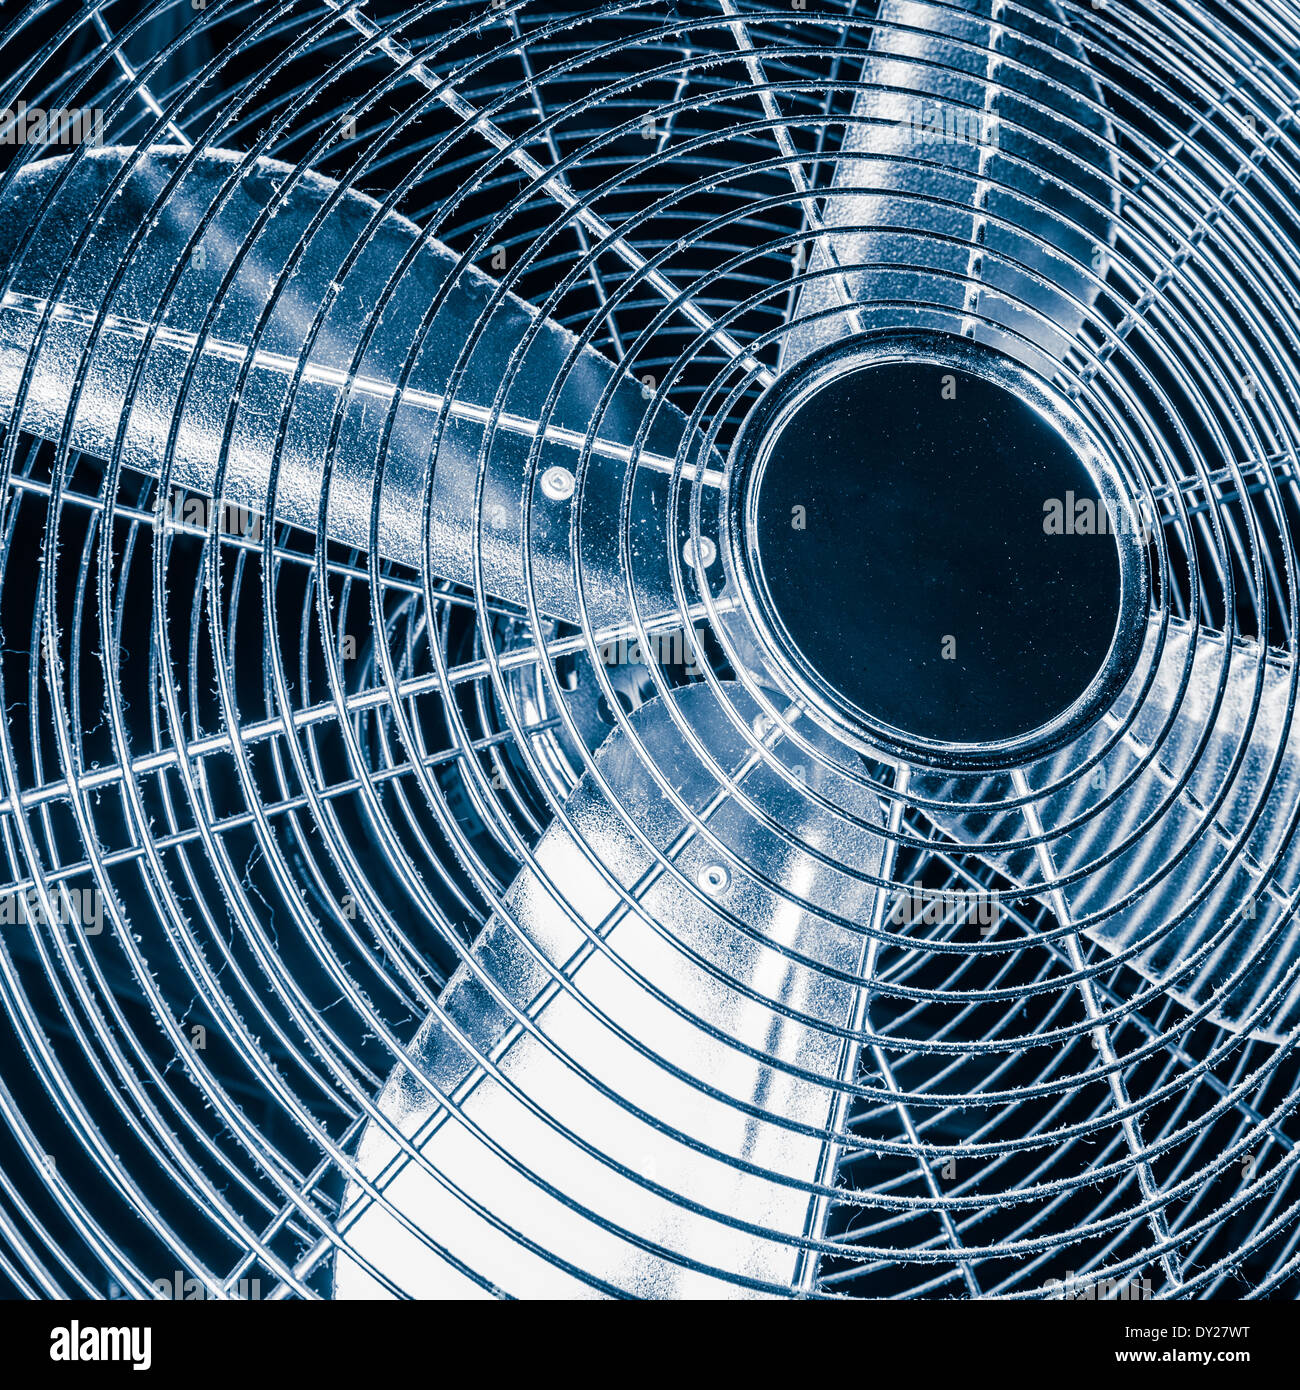 Domestic fan with four blades and dust, tinted black and white image Stock Photo